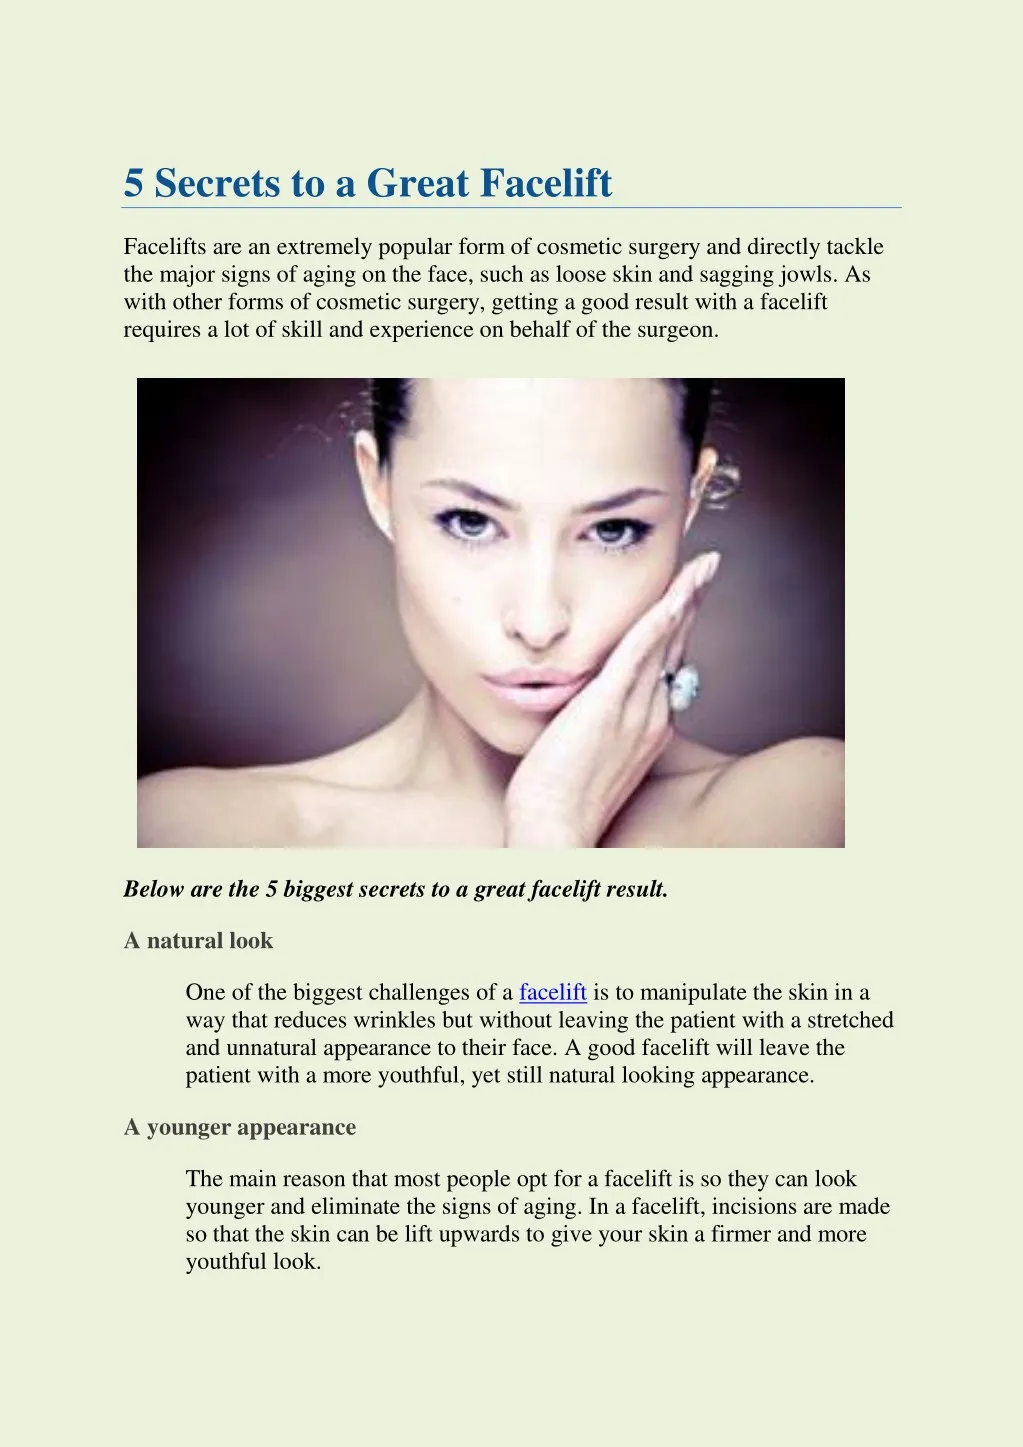 5 secrets to a great facelift